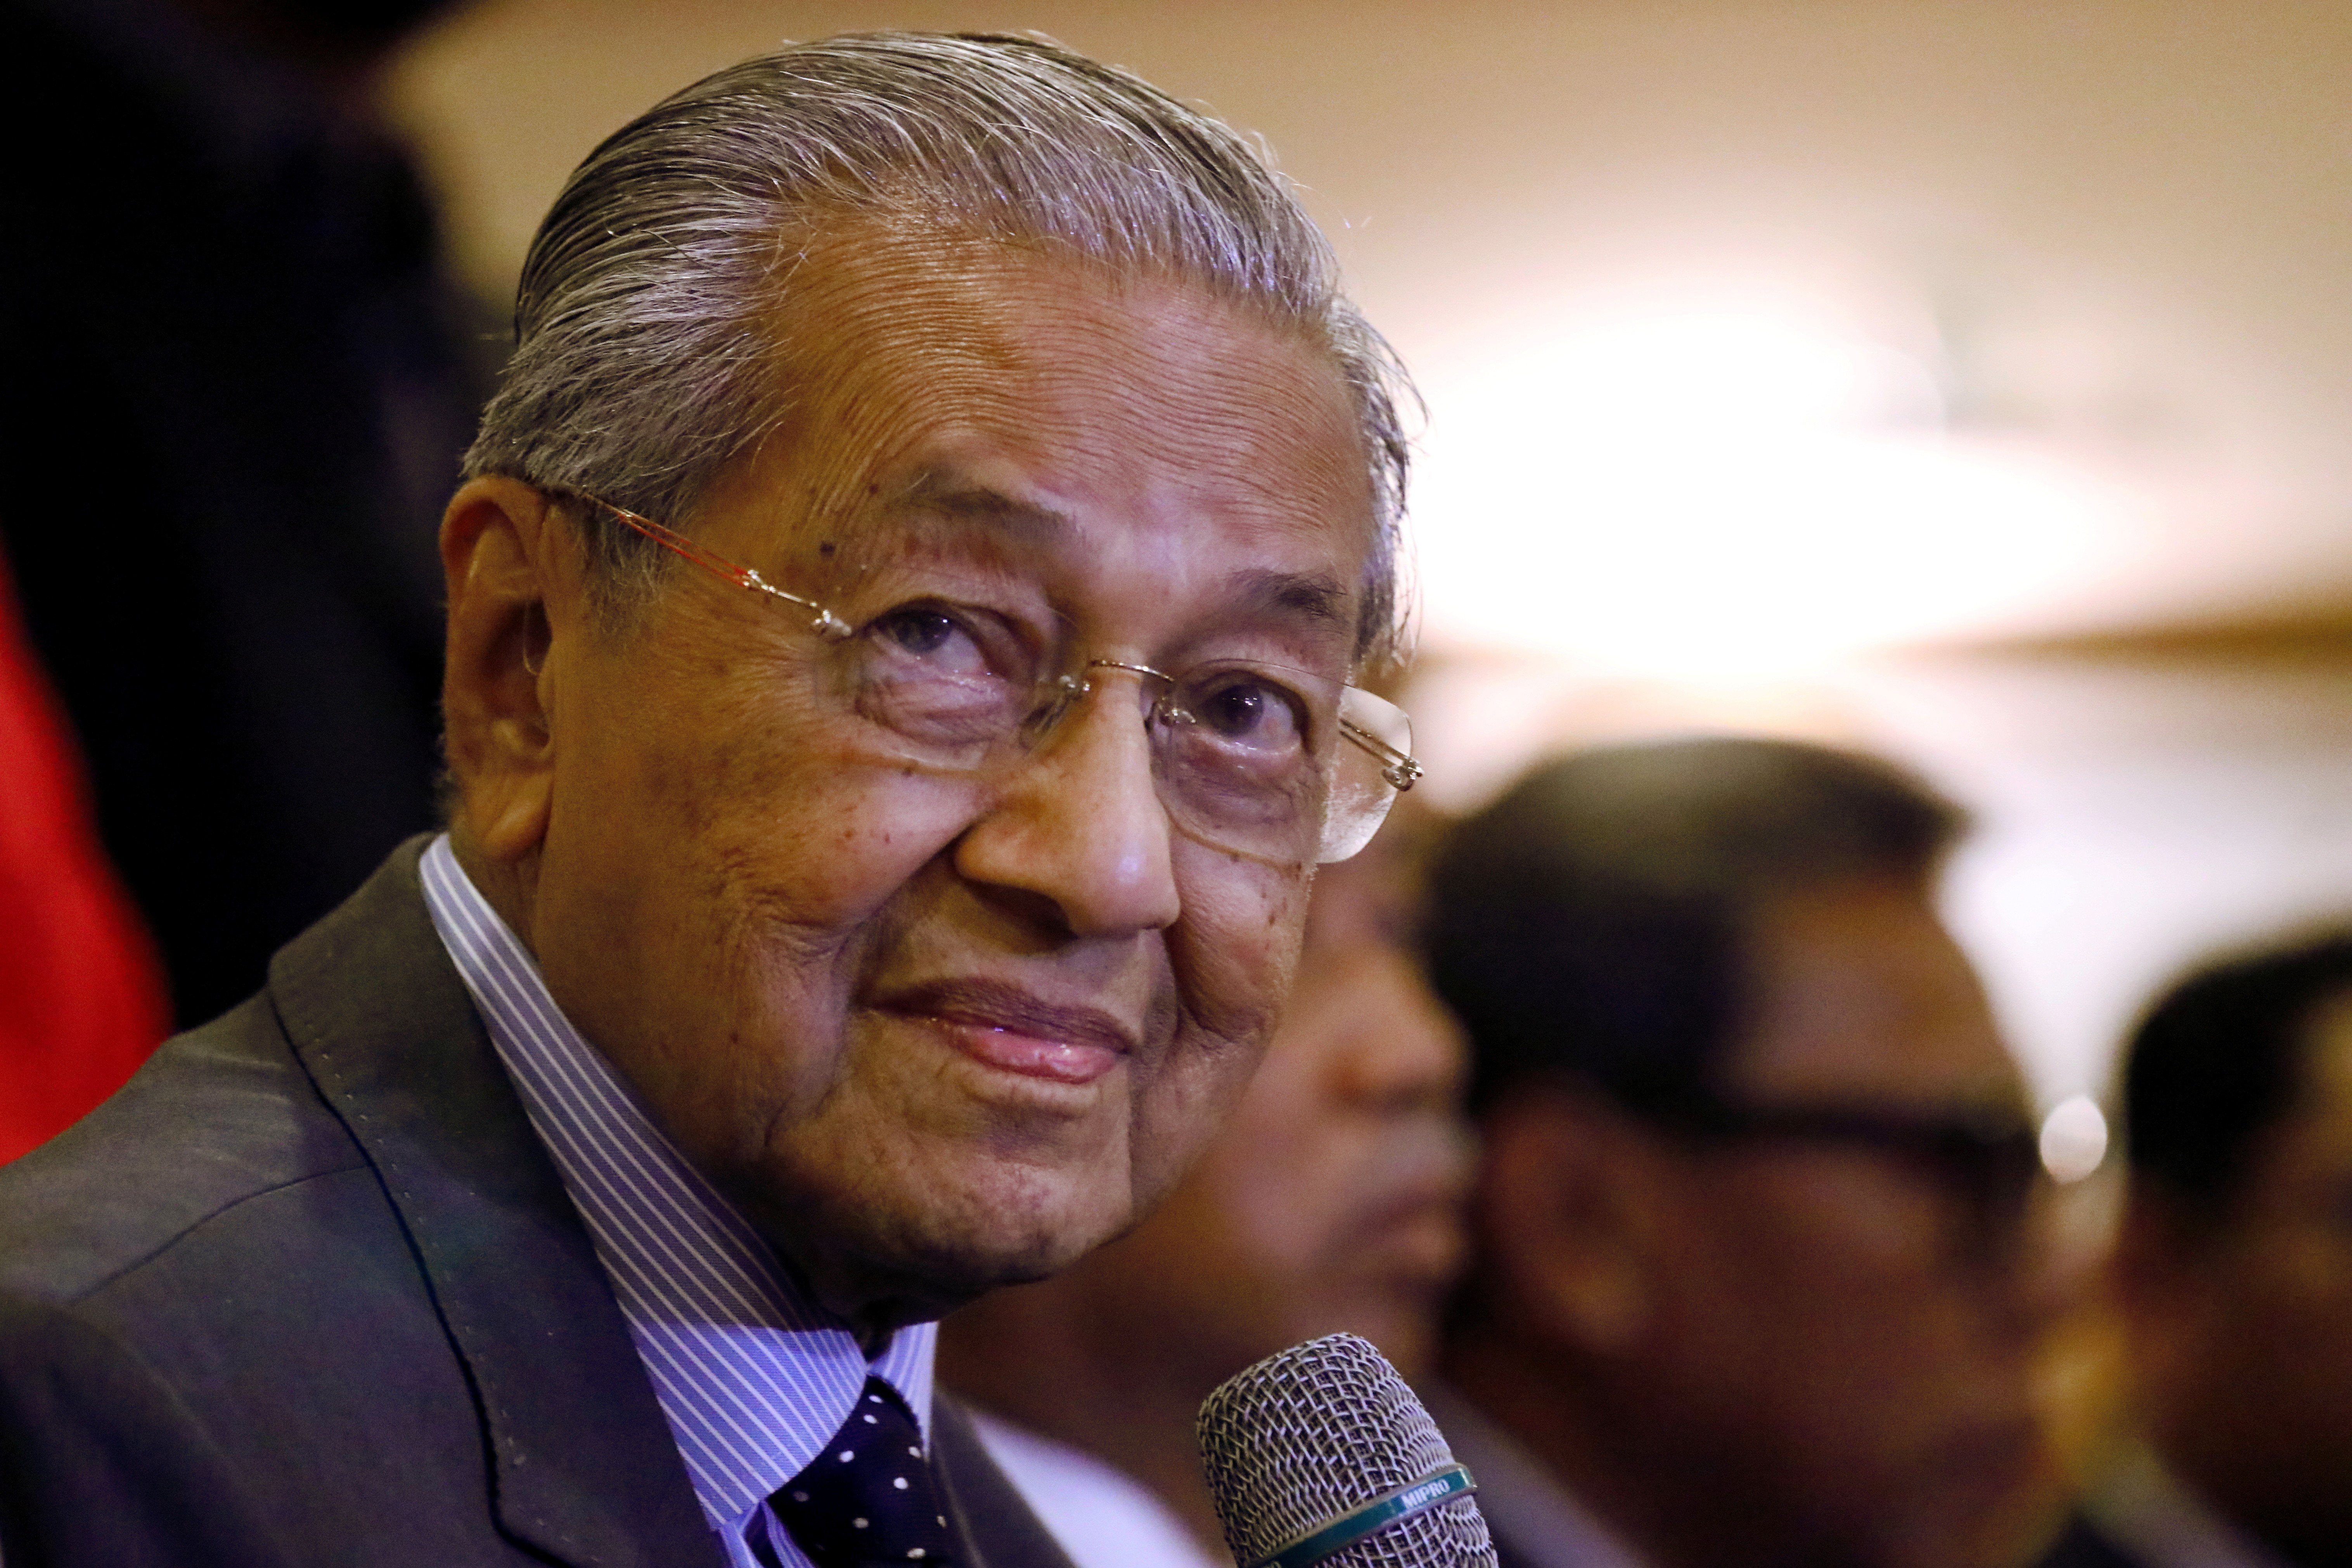 Prime Minister Mahathir Mohamad has deftly manoeuvred Malaysian politics over his seven-decade career. Photo: Reuters